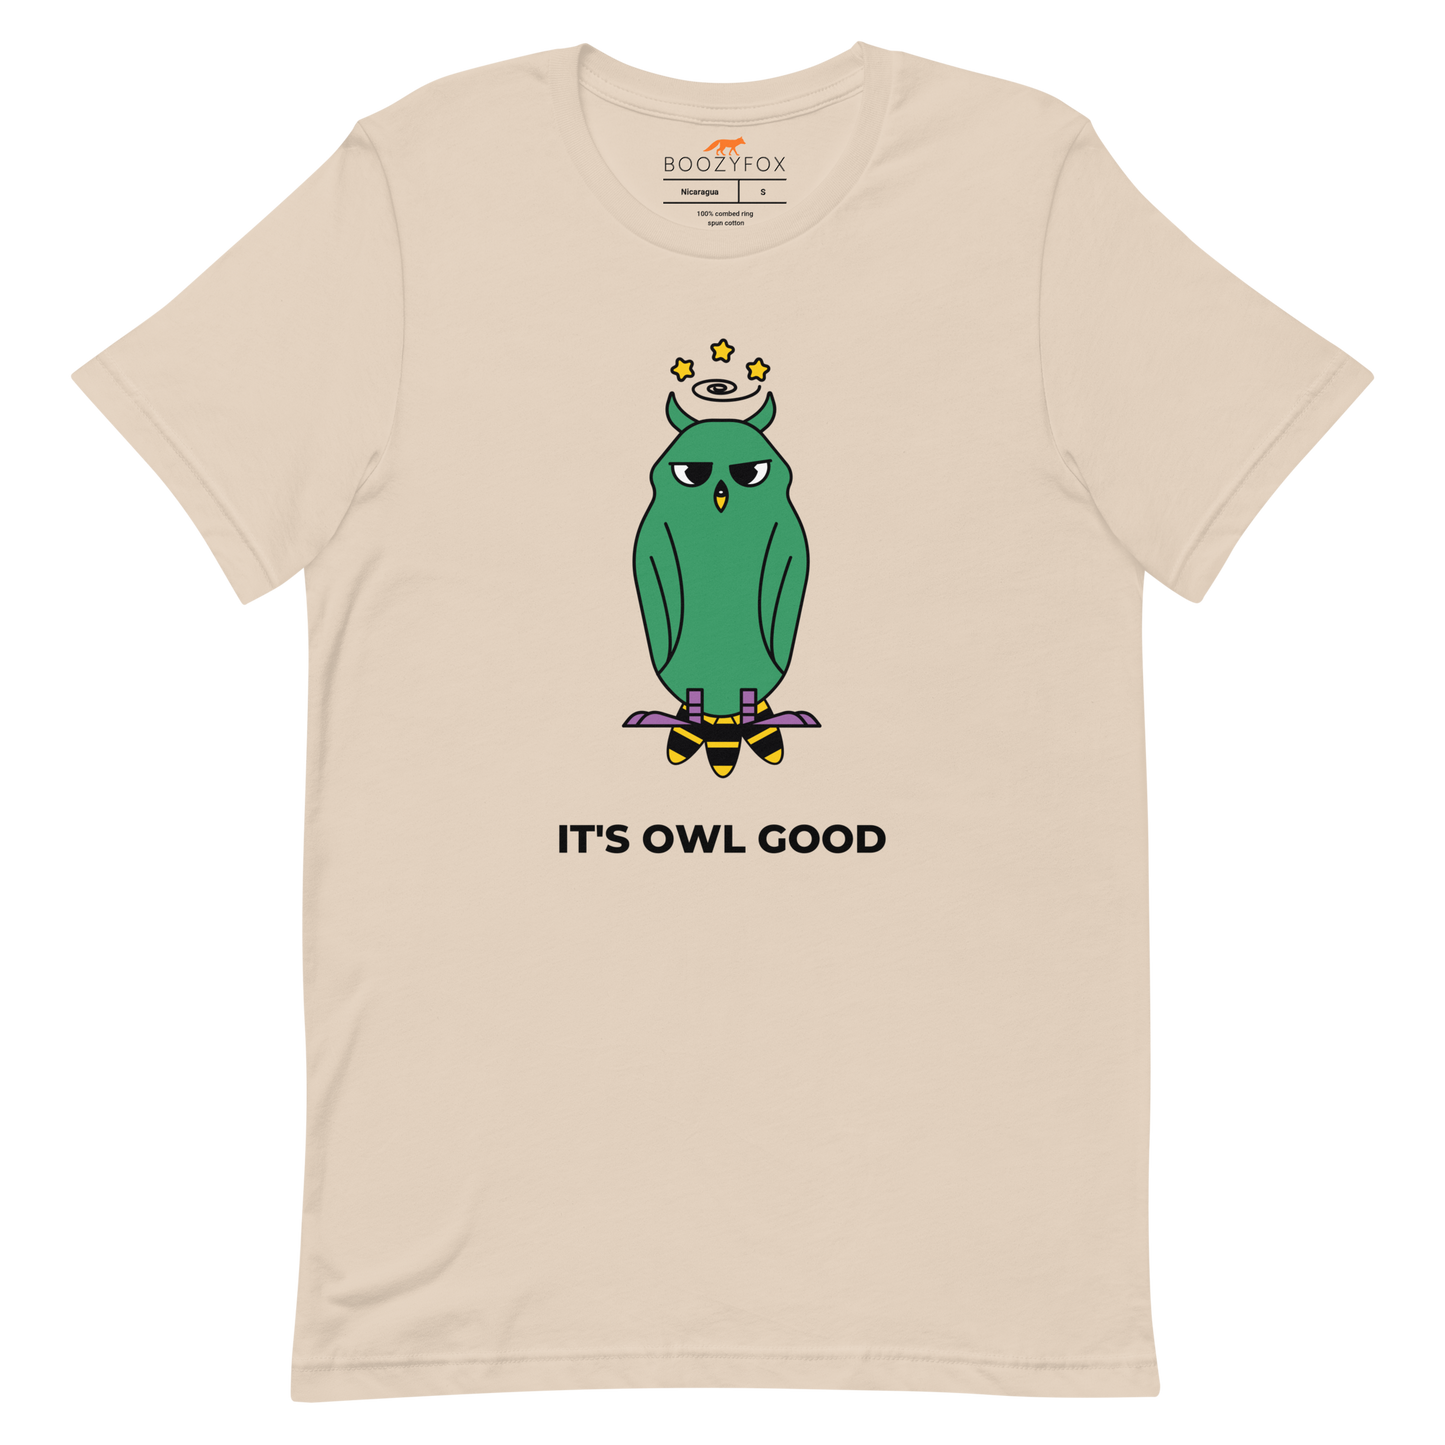 Soft Cream Premium Owl T-Shirt featuring captivating It's Owl Good graphic on the chest - Funny Graphic Owl Tees - Boozy Fox